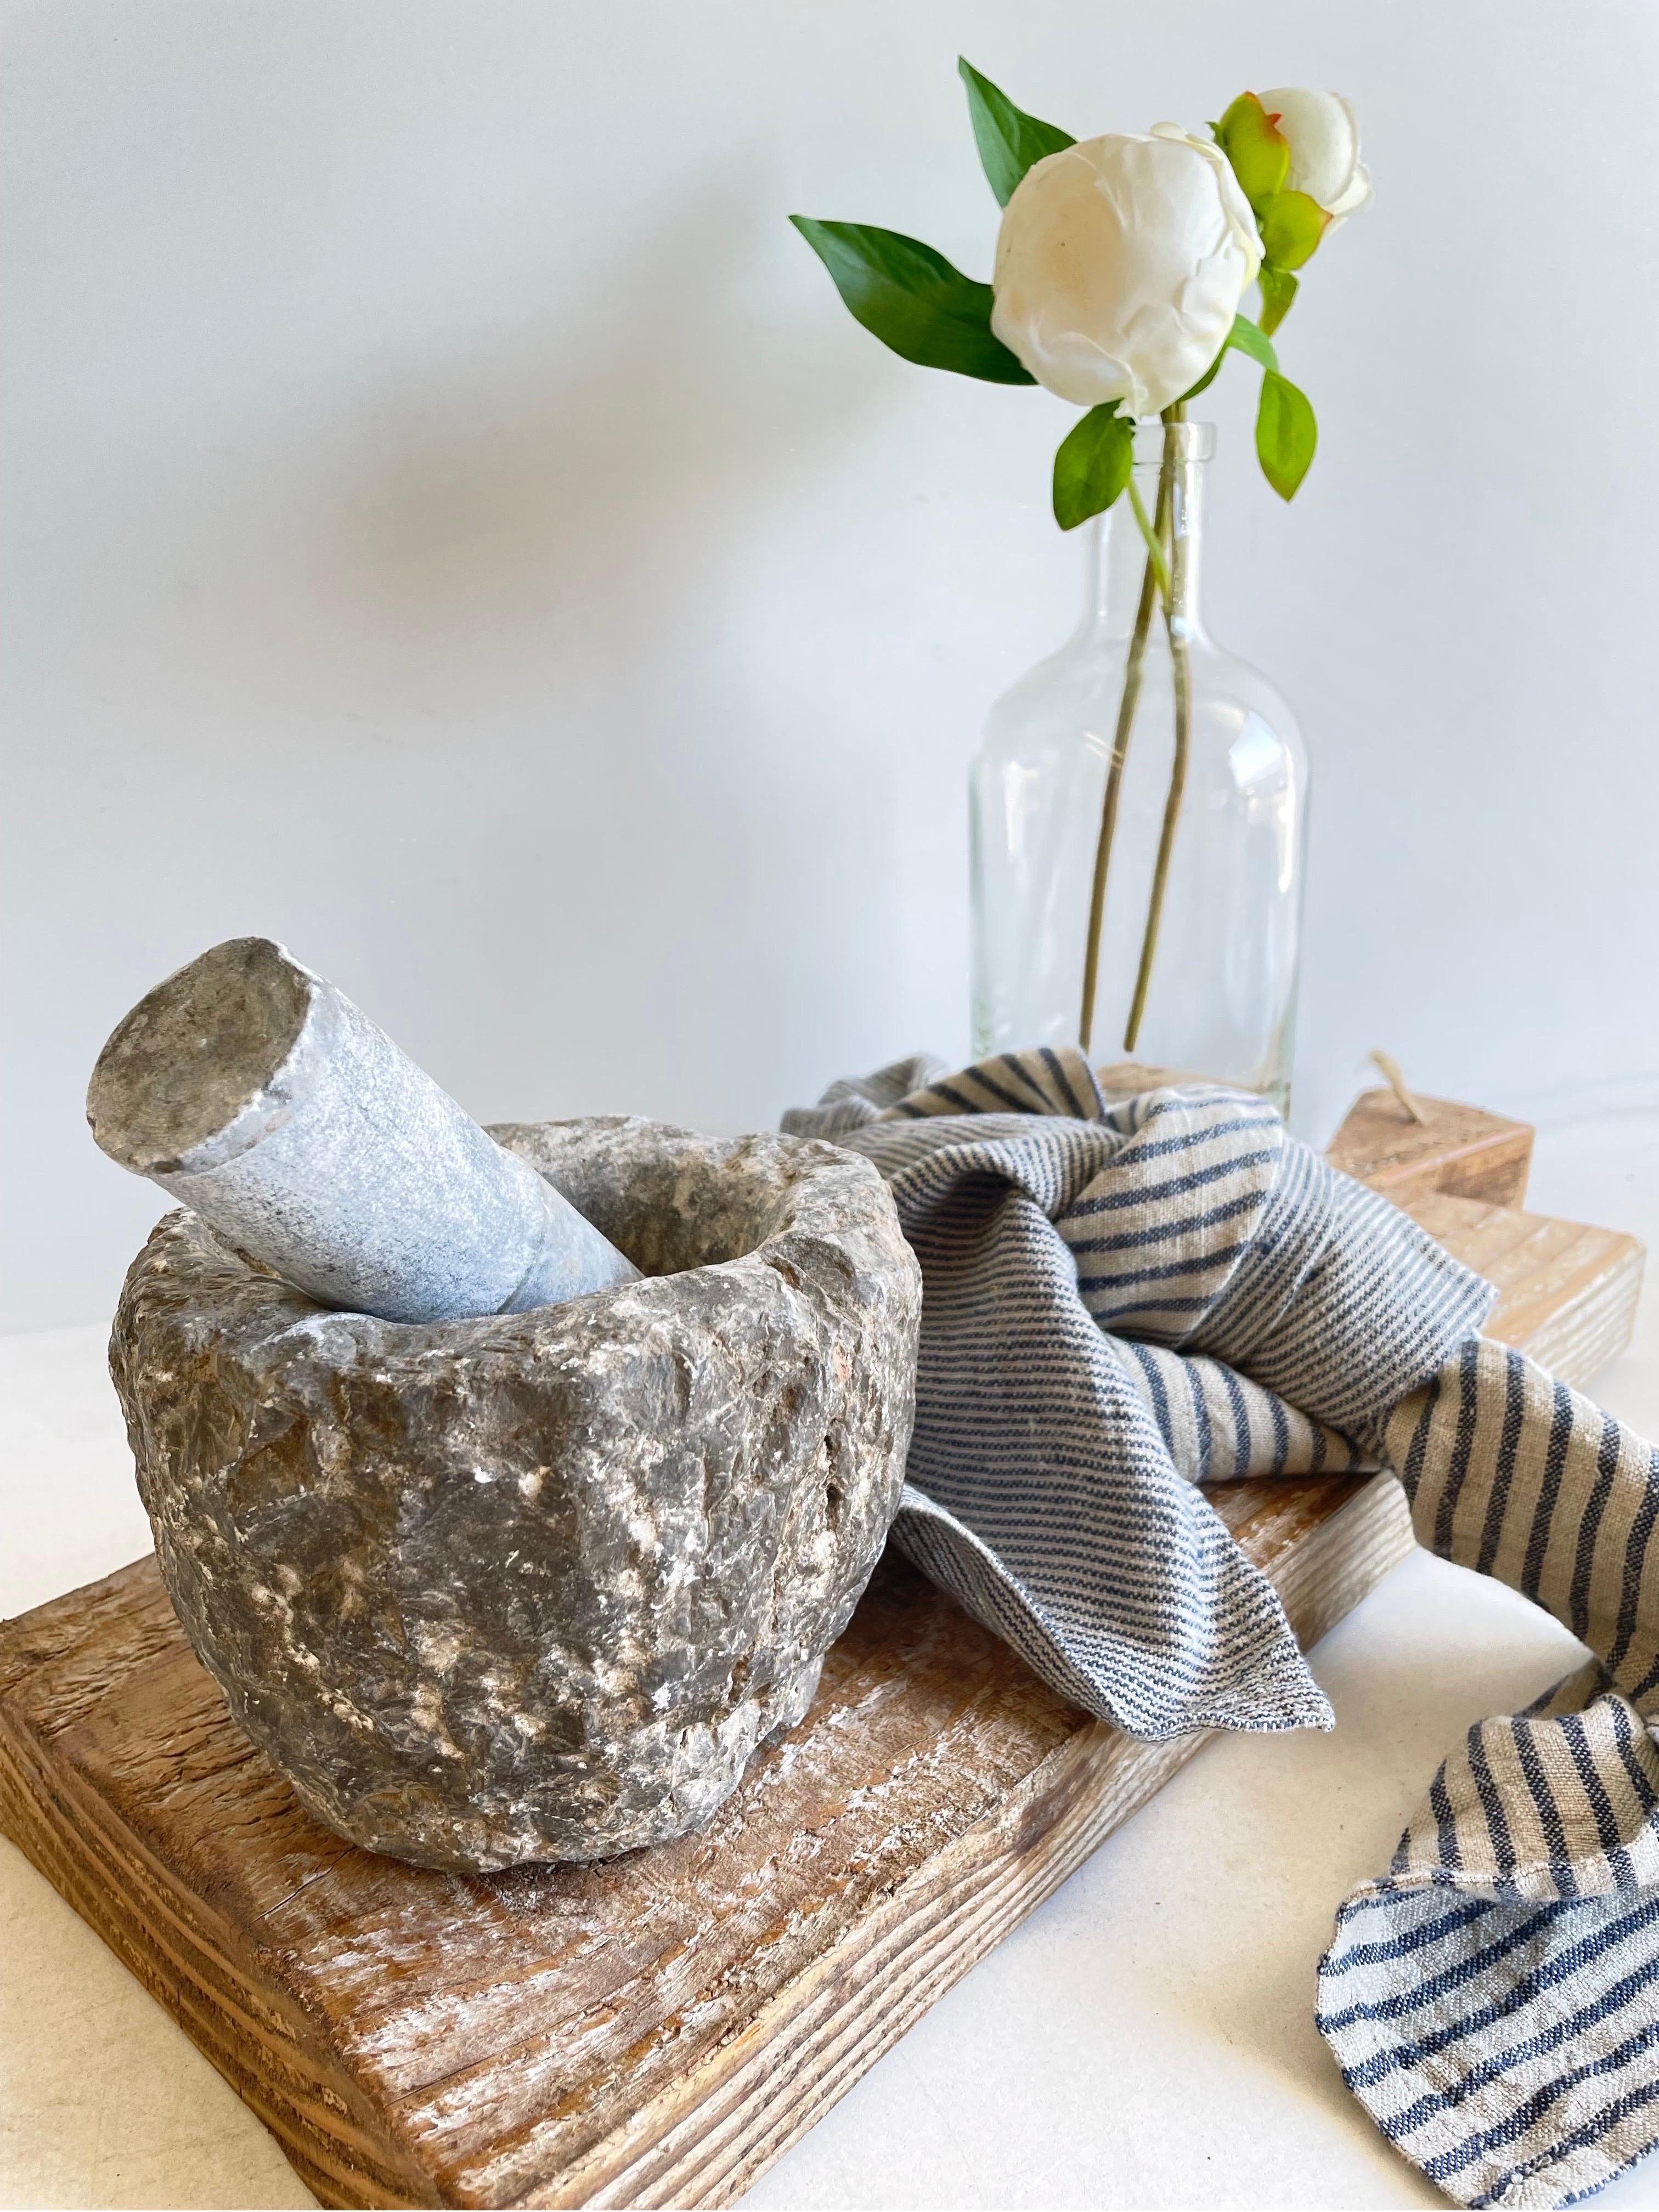 Antique stone mortar and pestle bowl set, great decorative item, or can be used. Accessories not included
Size: 4”H x 5 1/2”D x 3”Opening.